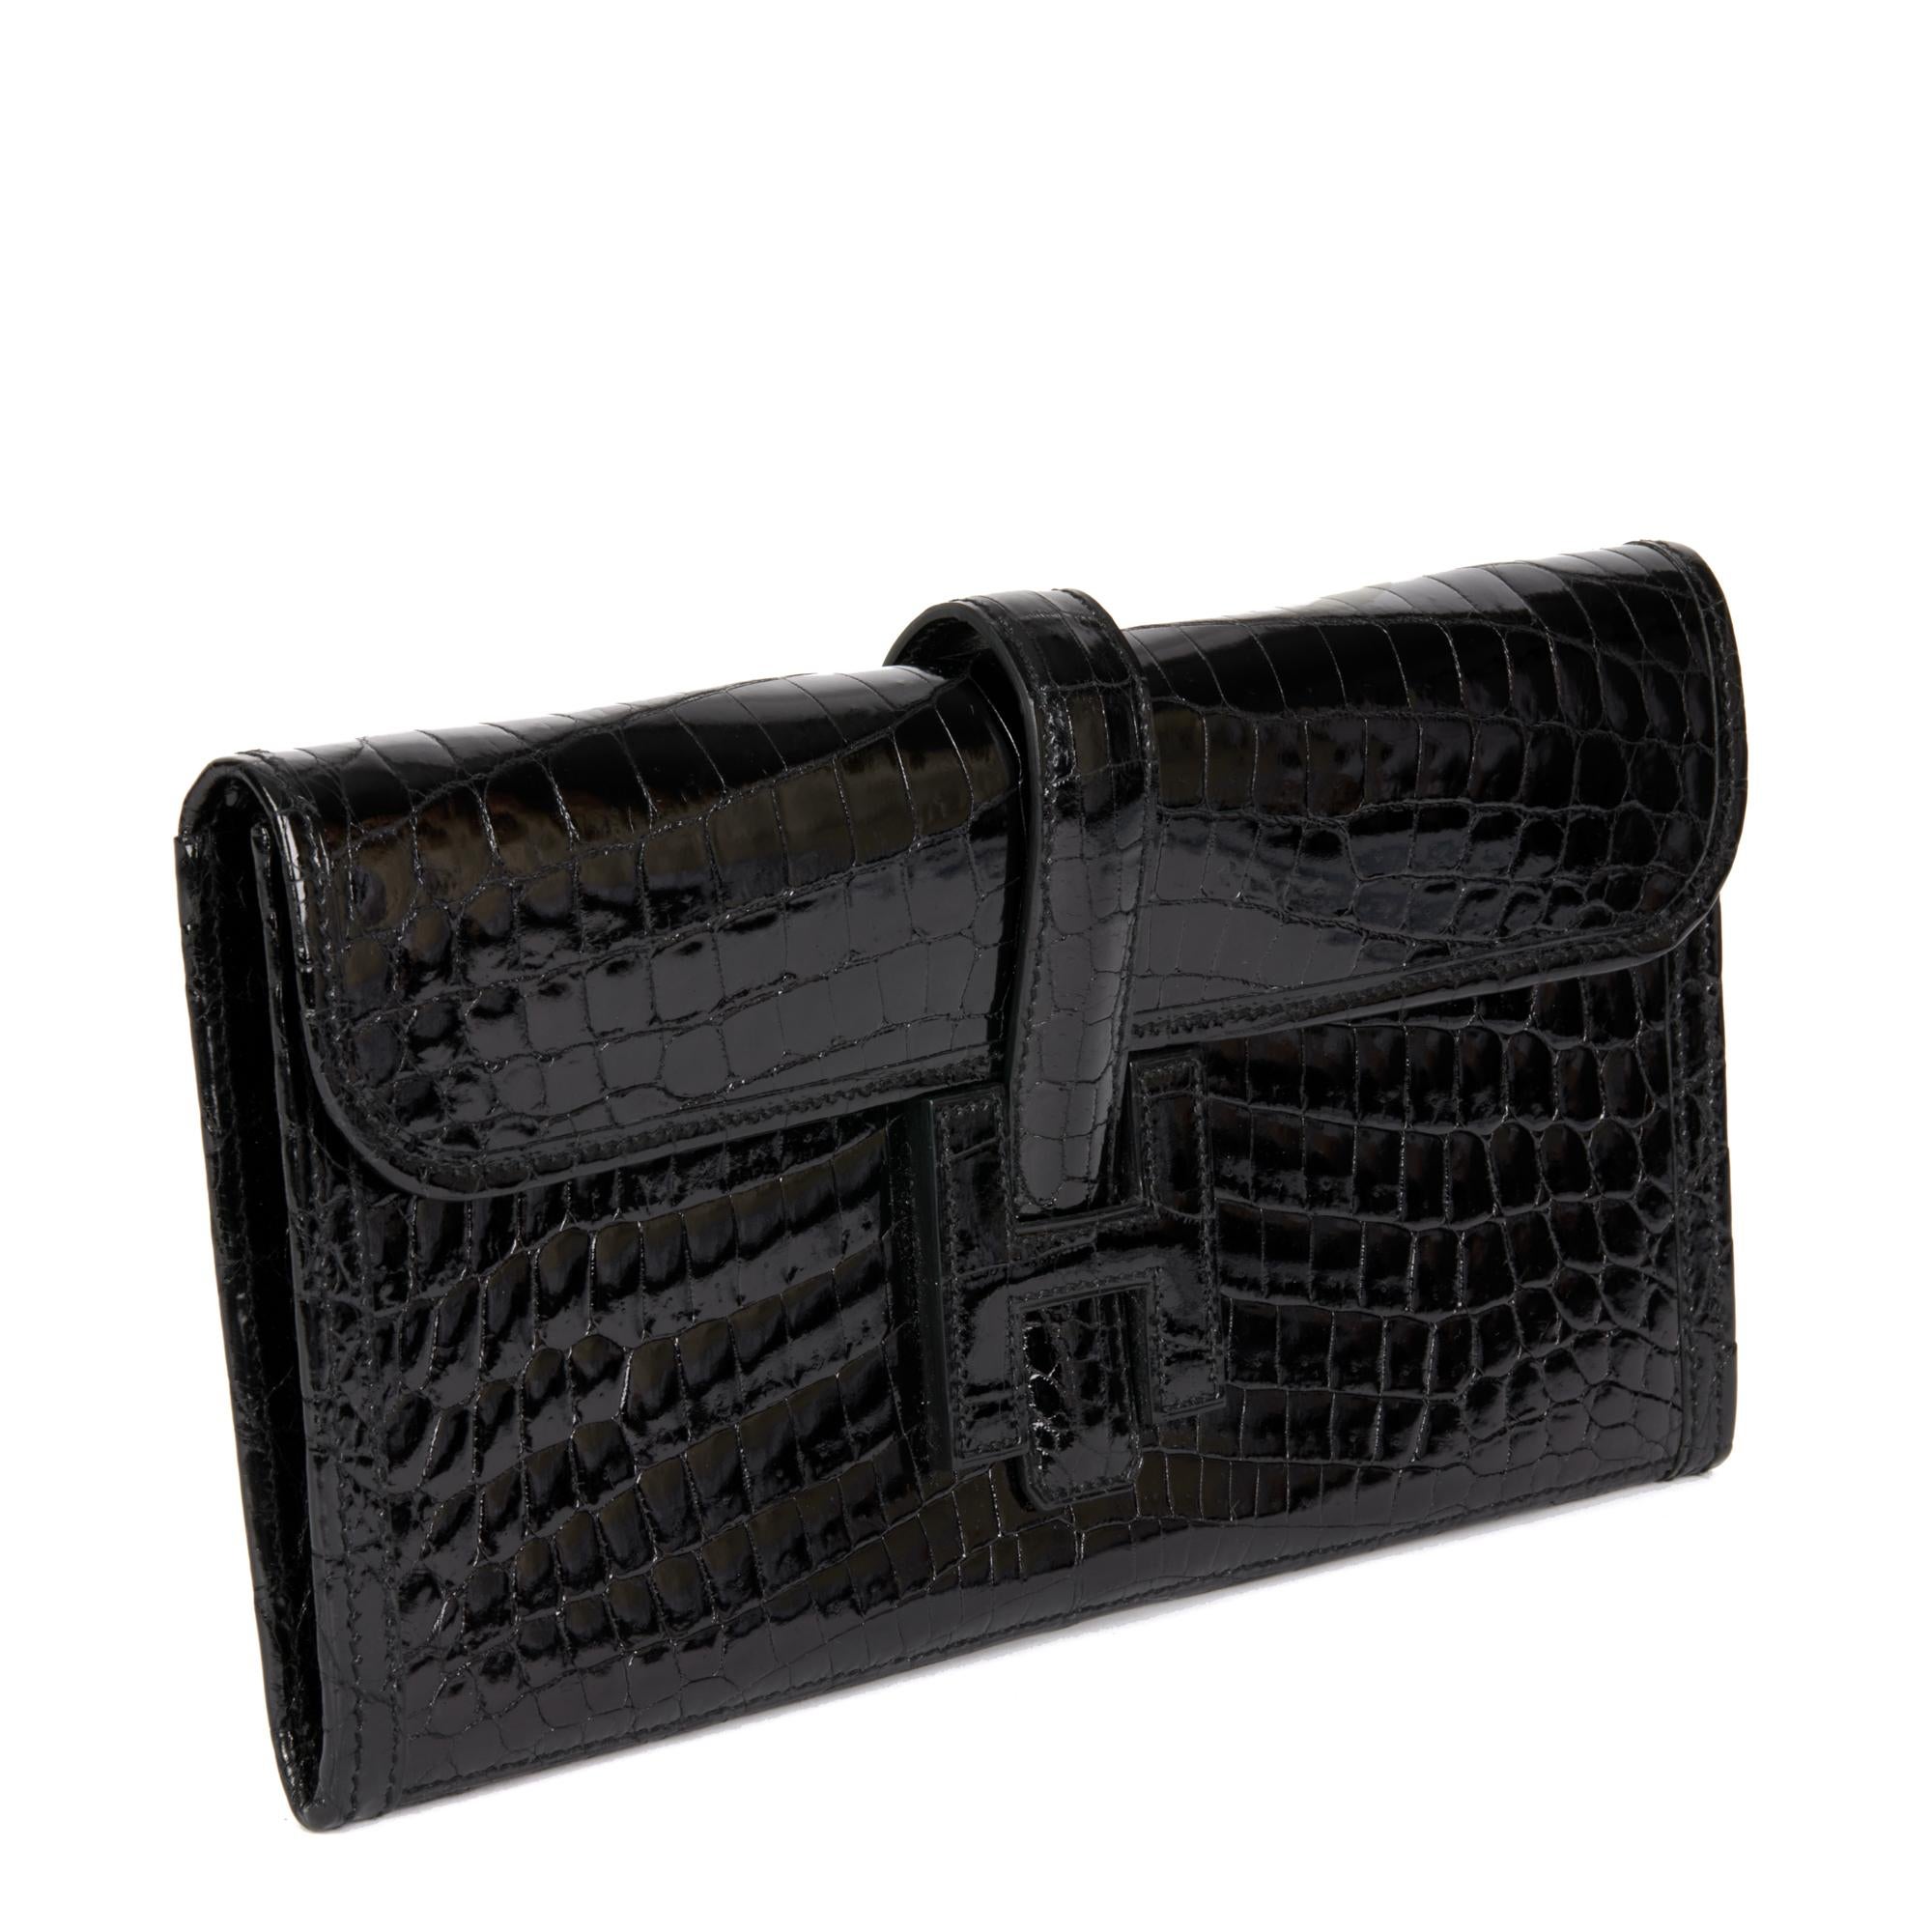 HERMÈS
Black Niloticus Crocodile Leather Jige Elan 29

Serial Number: X
Age (Circa): 2016
Accompanied By: Hermès Dust Bag
Authenticity Details: Date Stamp (Made in France)
Gender: Ladies
Type: Clutch

Colour: Black
Material(s): Niloticus